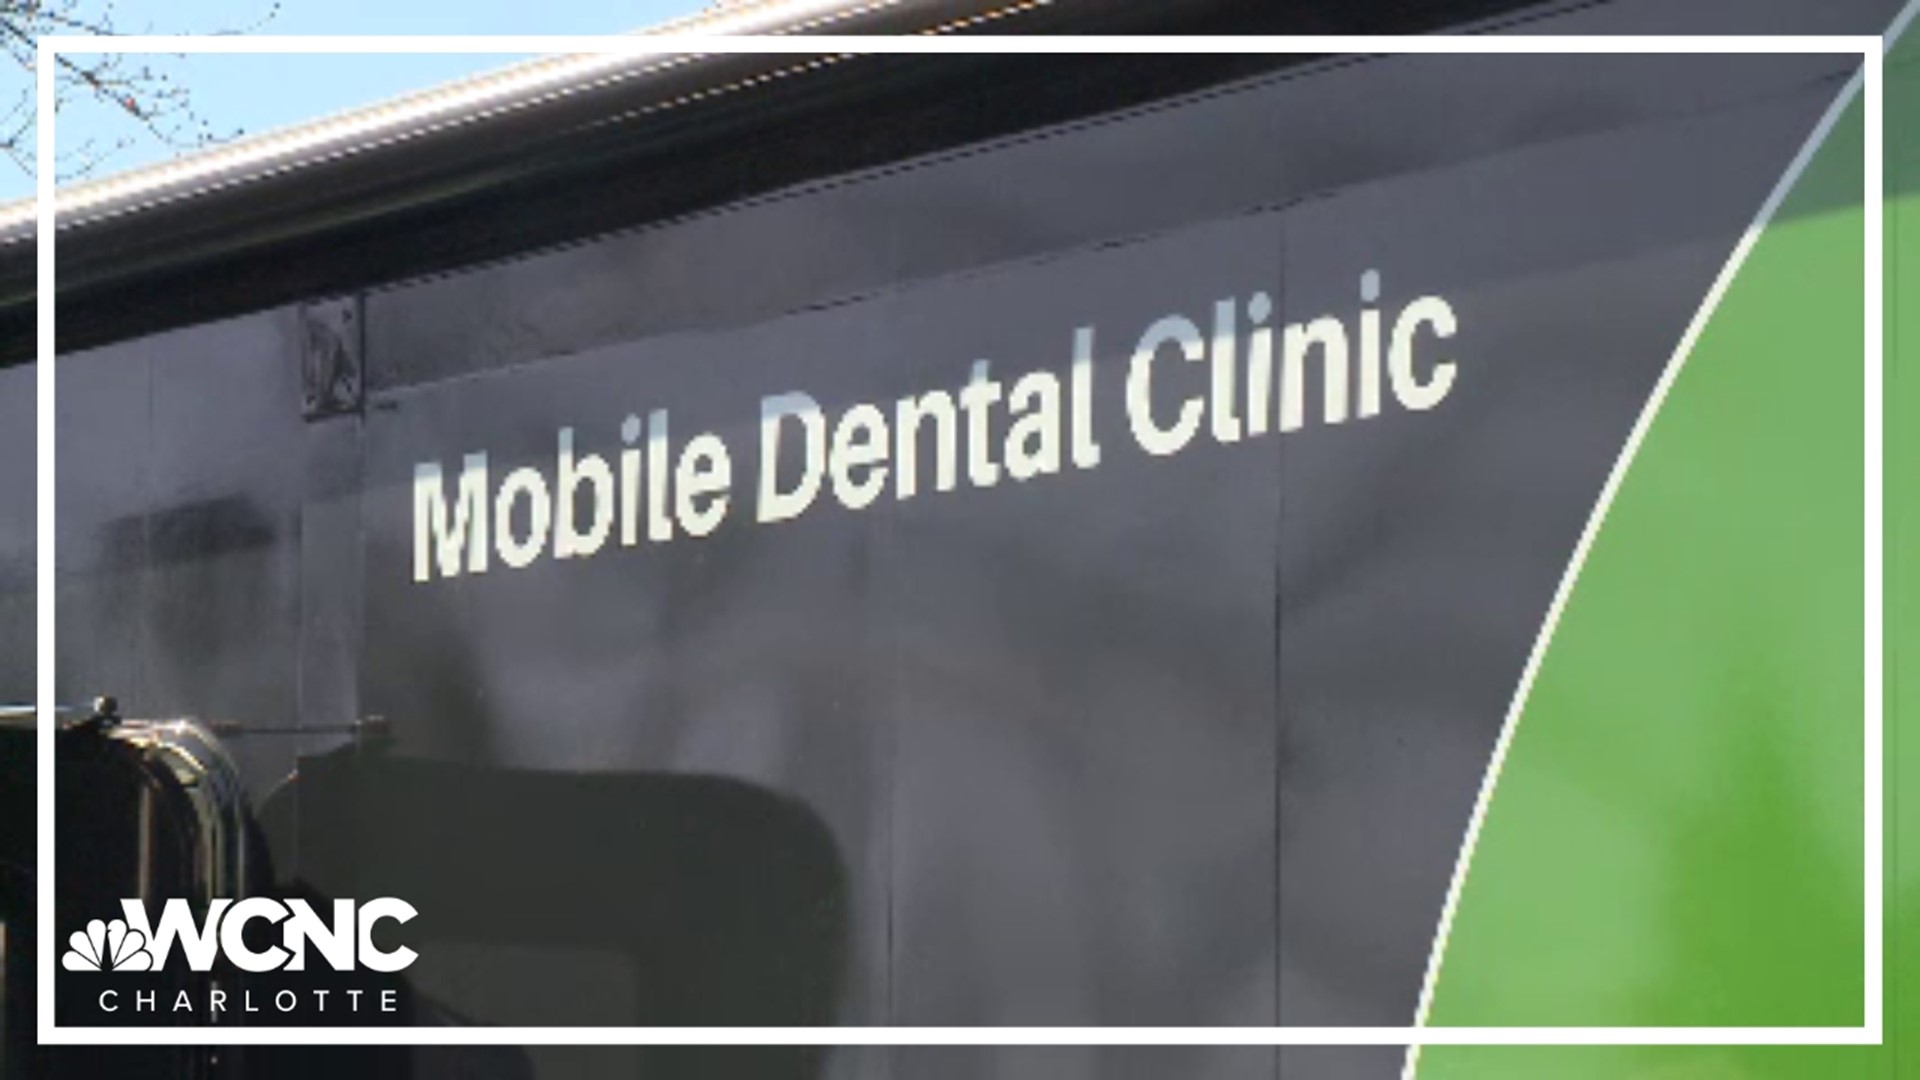 The North Carolina Association of Free and Charitable Clinics unveiled a new mobile dental clinic.